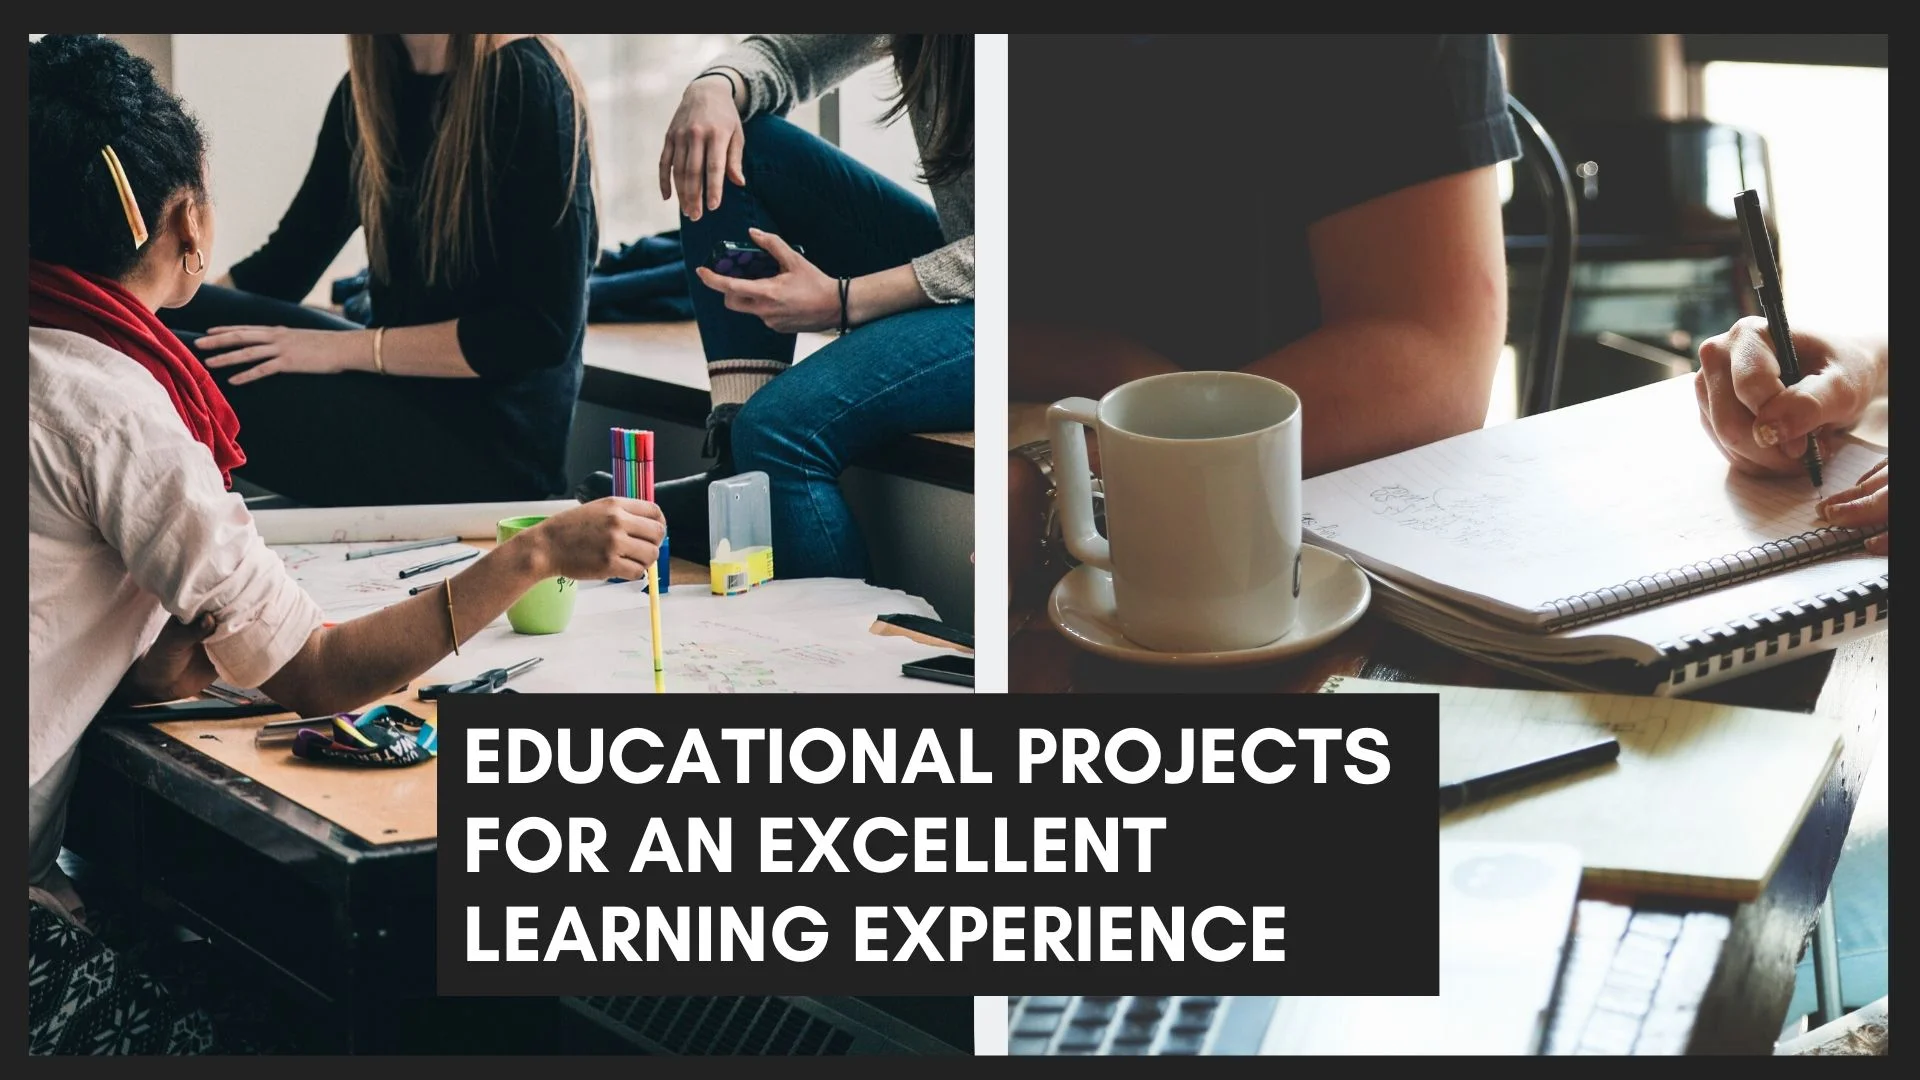 EDUCATIONAL PROJECTS for learning